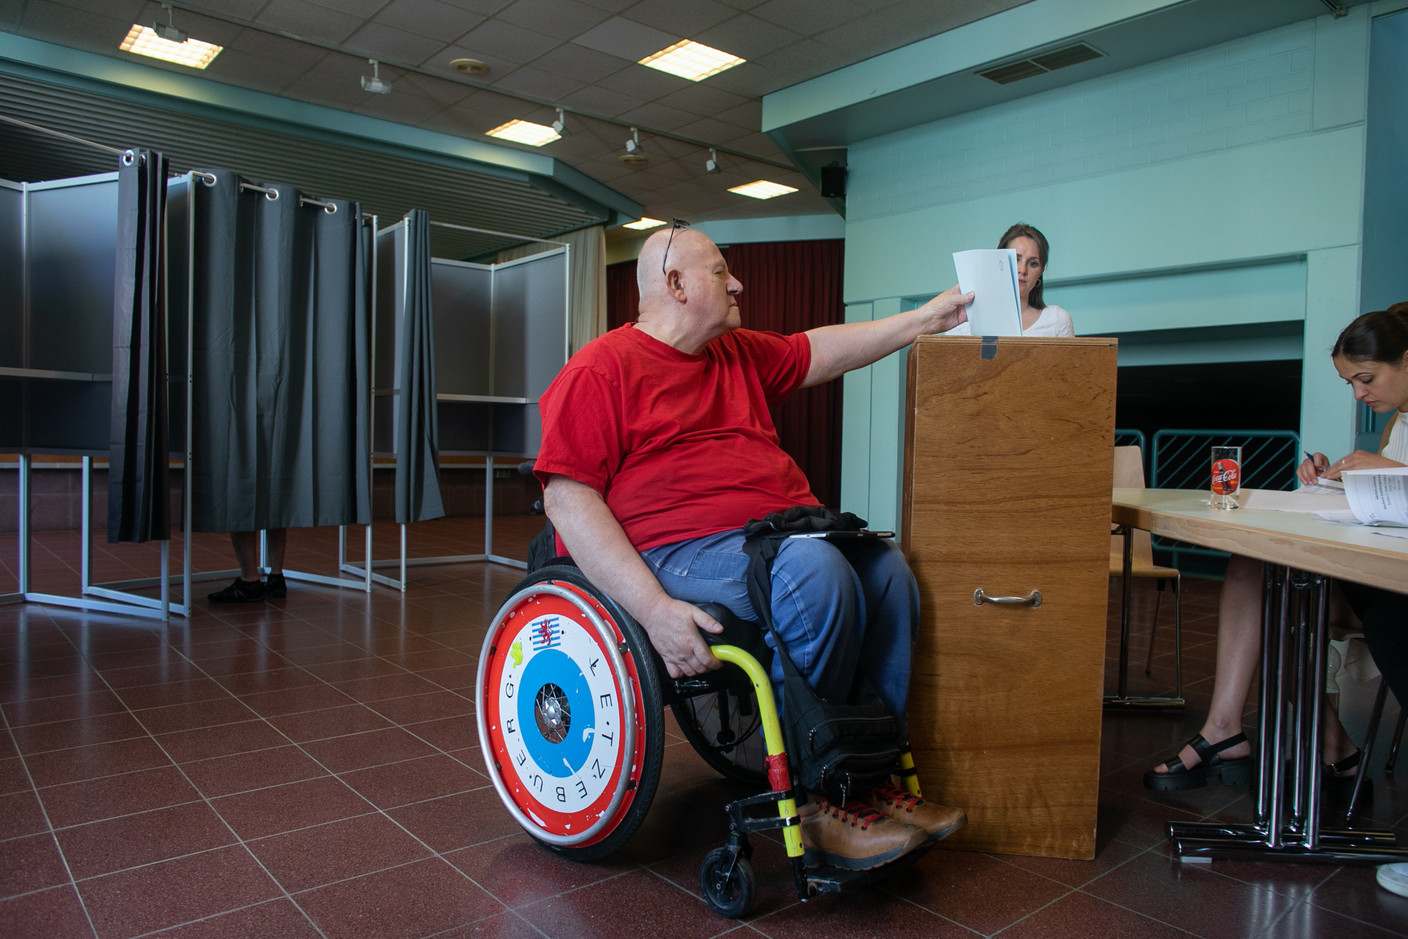 Voters are seen at a polling station in Luxembourg City’s Beggen district, 11 June 2023. Photo: Maison Moderne